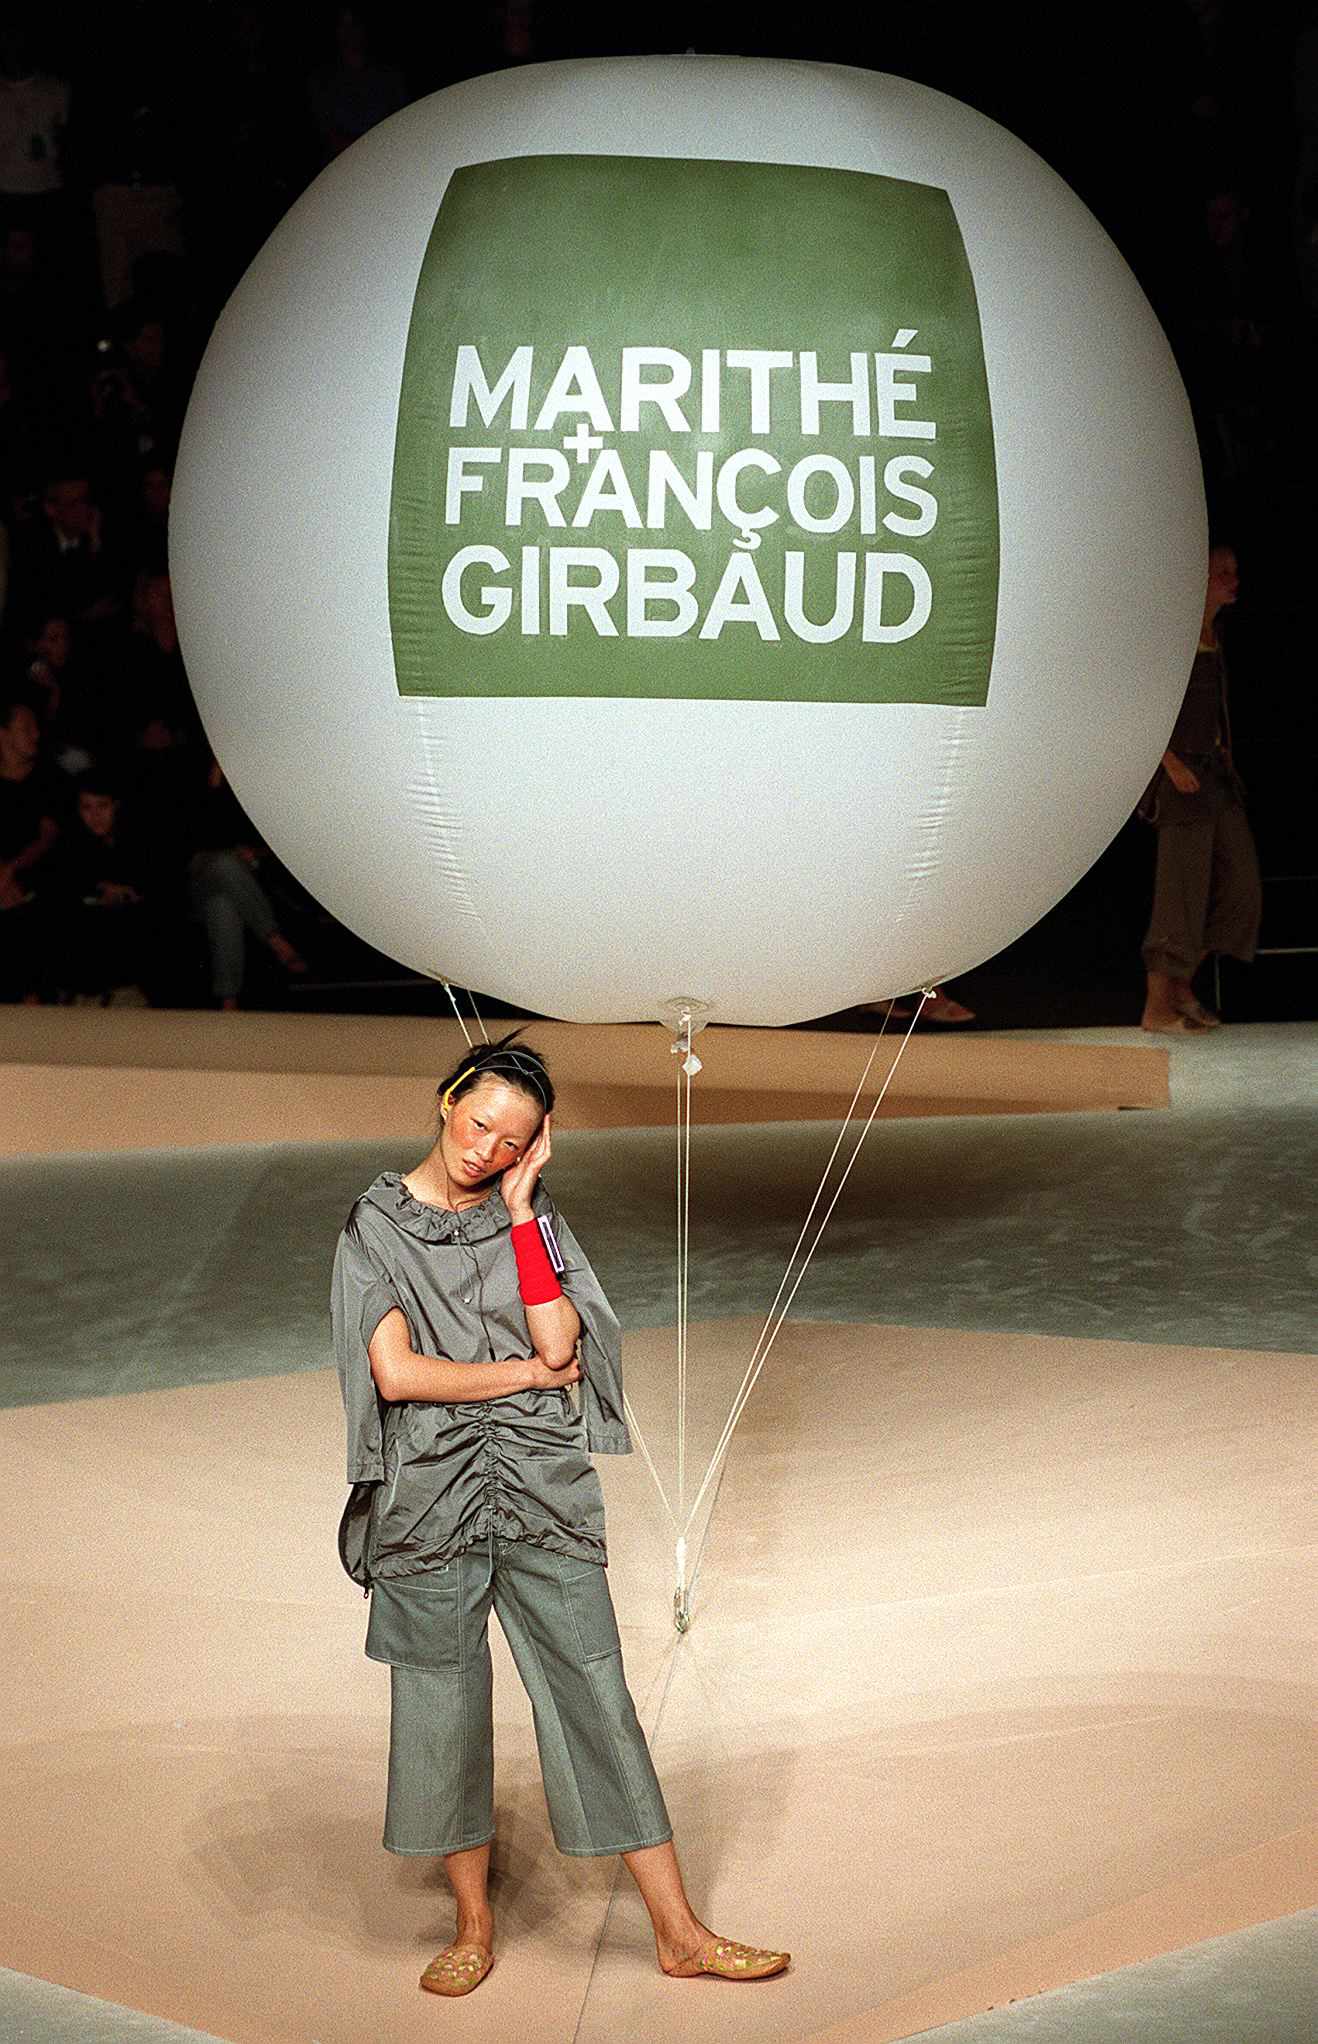 A model poses with a large white balloon with a green Marithe + Francois Girbaud logo